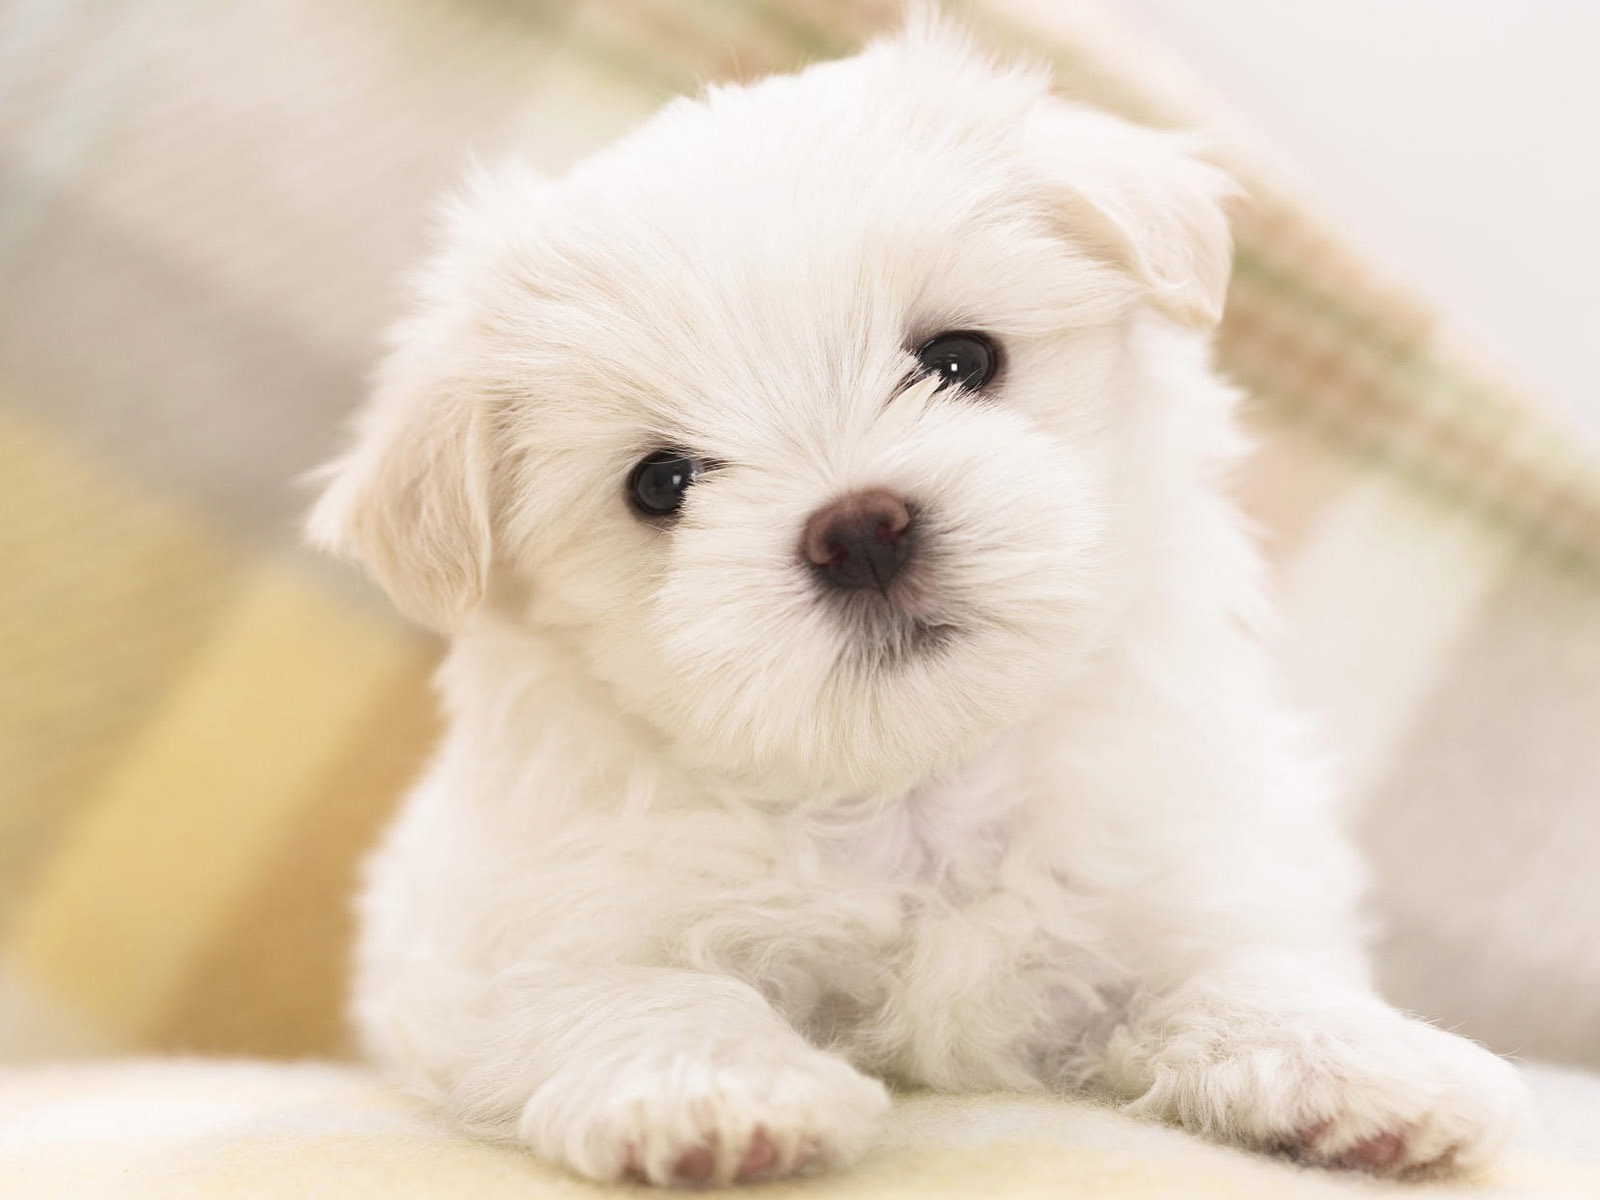 Puppy Photo HD wallpapers (8) #6 - 1600x1200